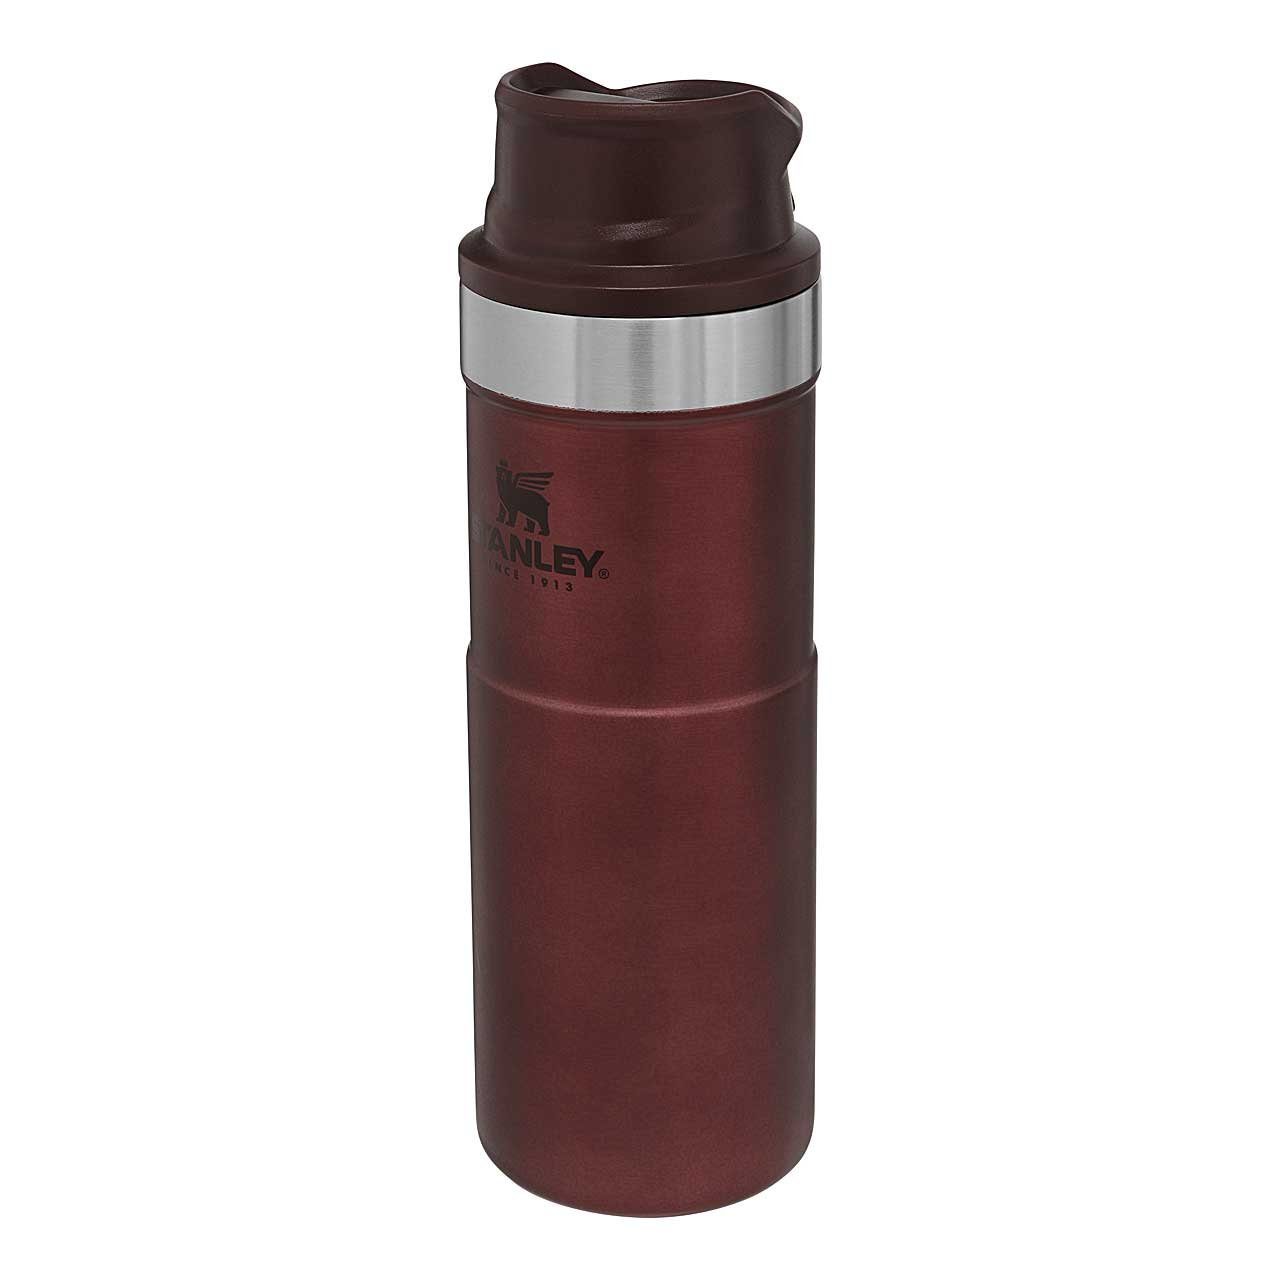 Wine TRIGGER-ACTION CLASSIC Kaffeebecher STANLEY 0,473 l Stanley Coffee-to-go-Becher